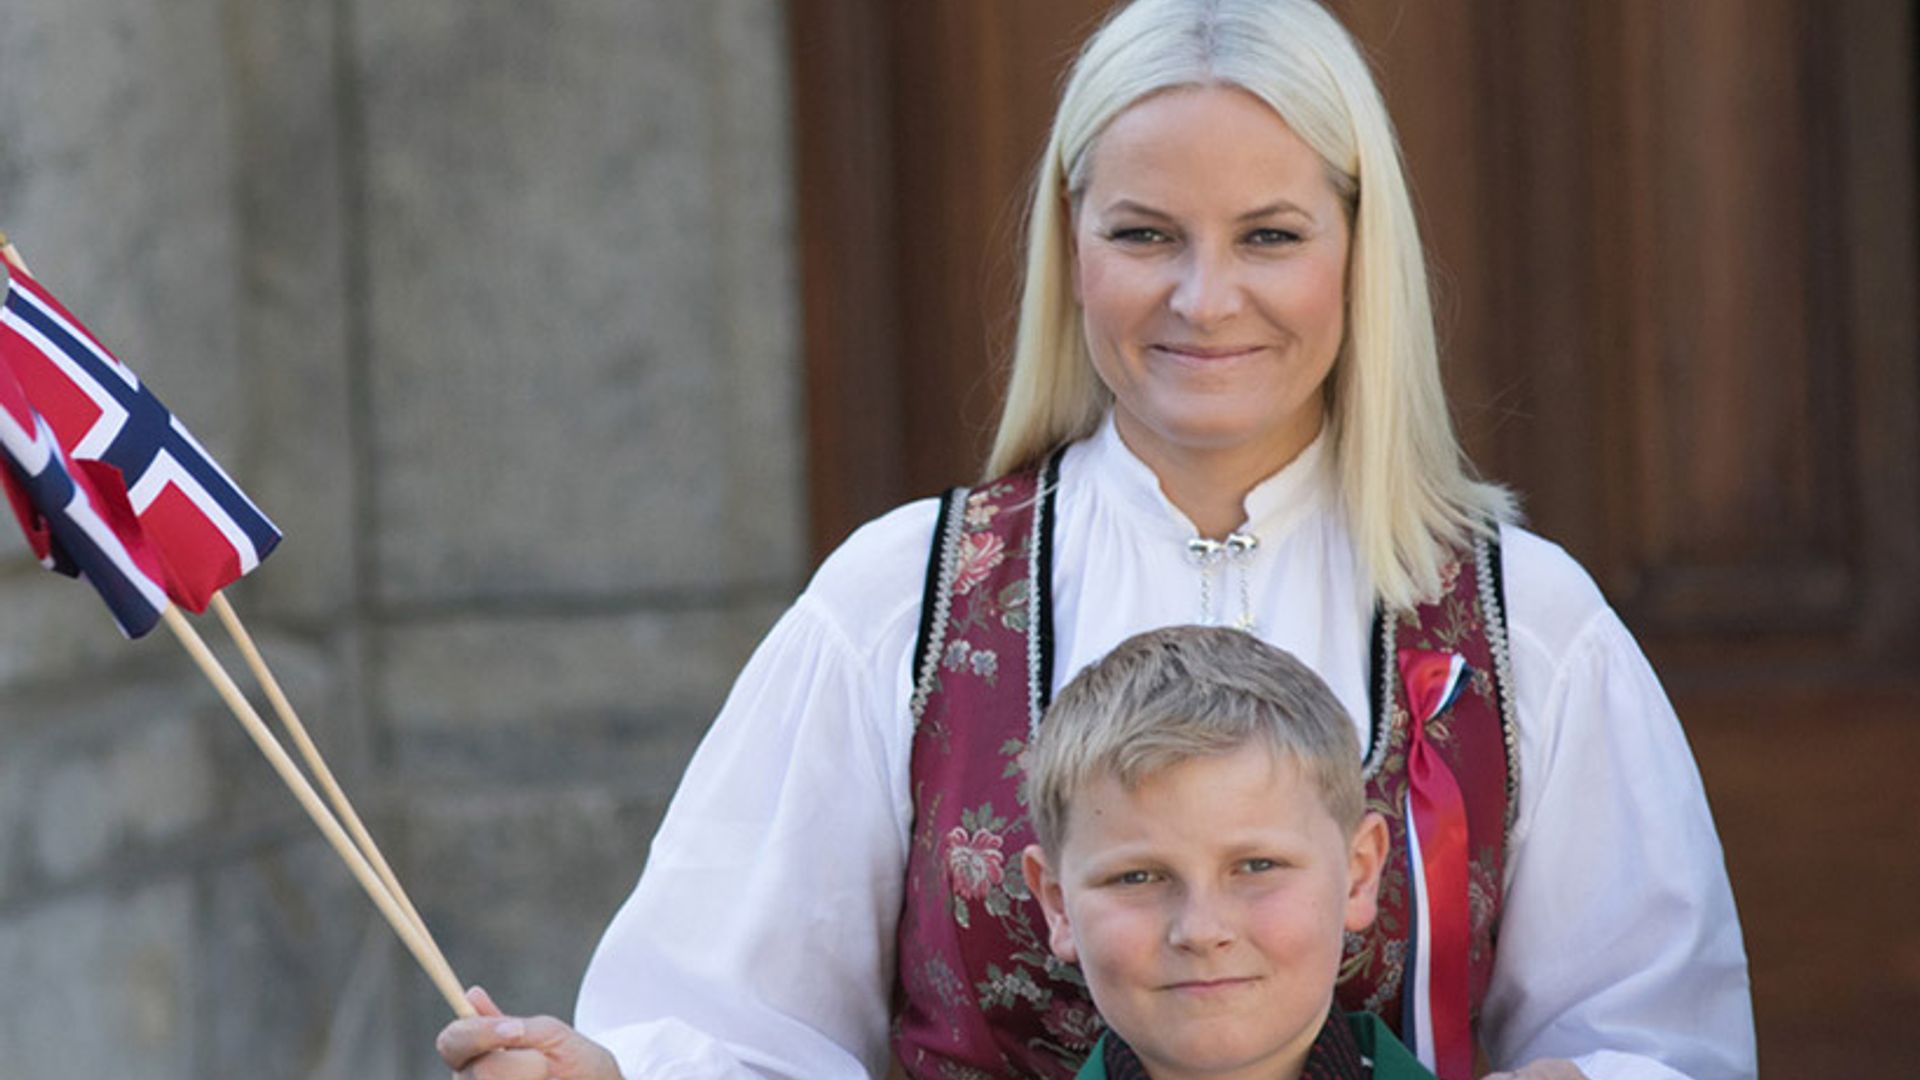 Princess Mette-Marit of Norway's 11-year-old son injured in bike accident